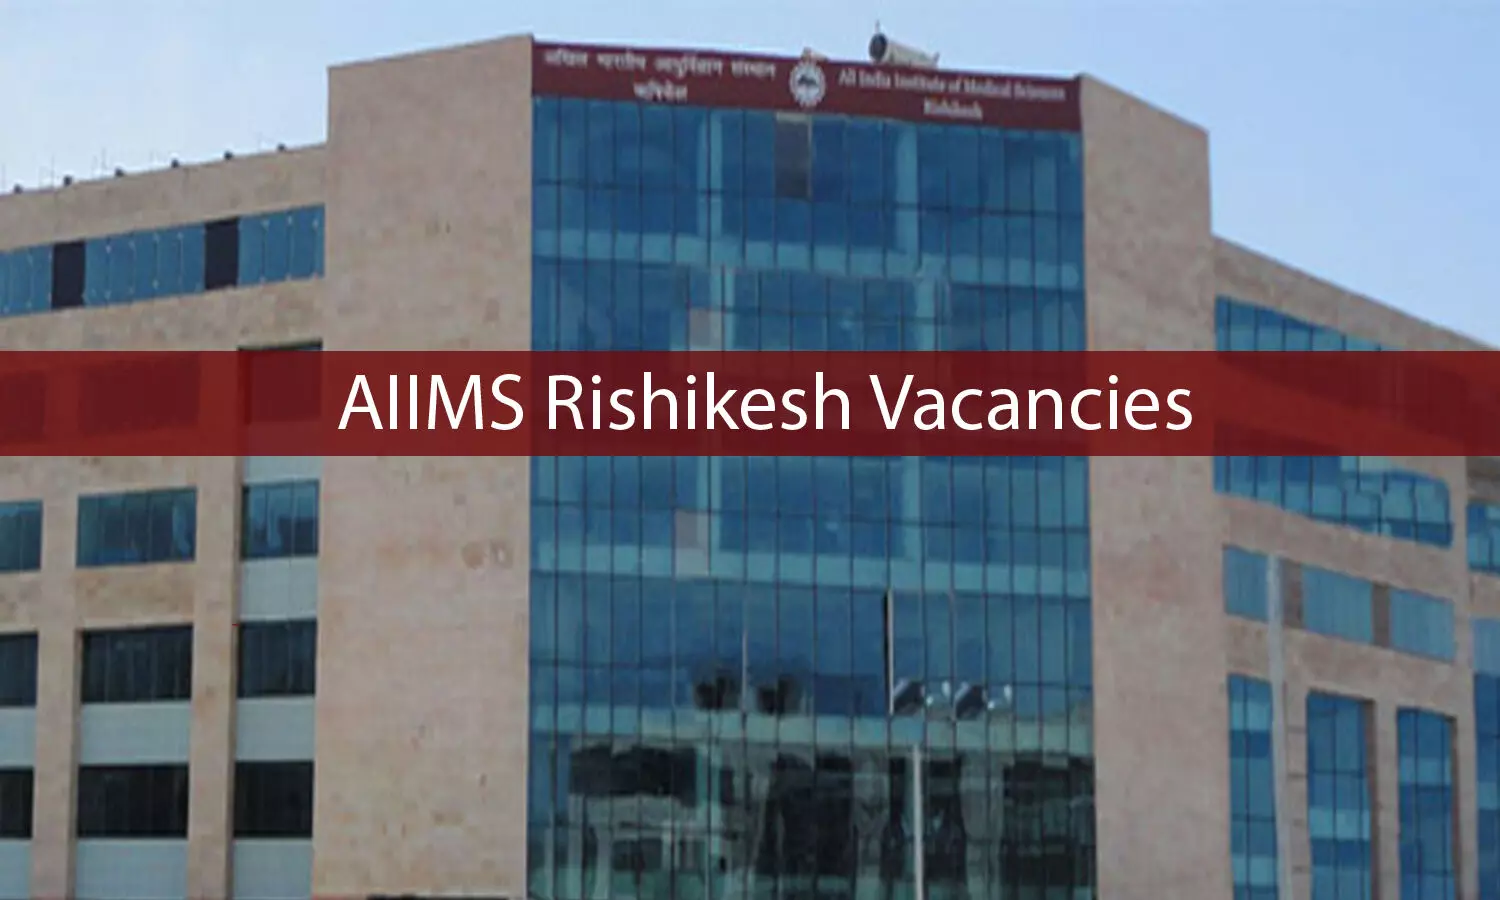 JOB ALERT: AIIMS Rishikesh Releases Vacancies For Faculty Posts: Apply Now